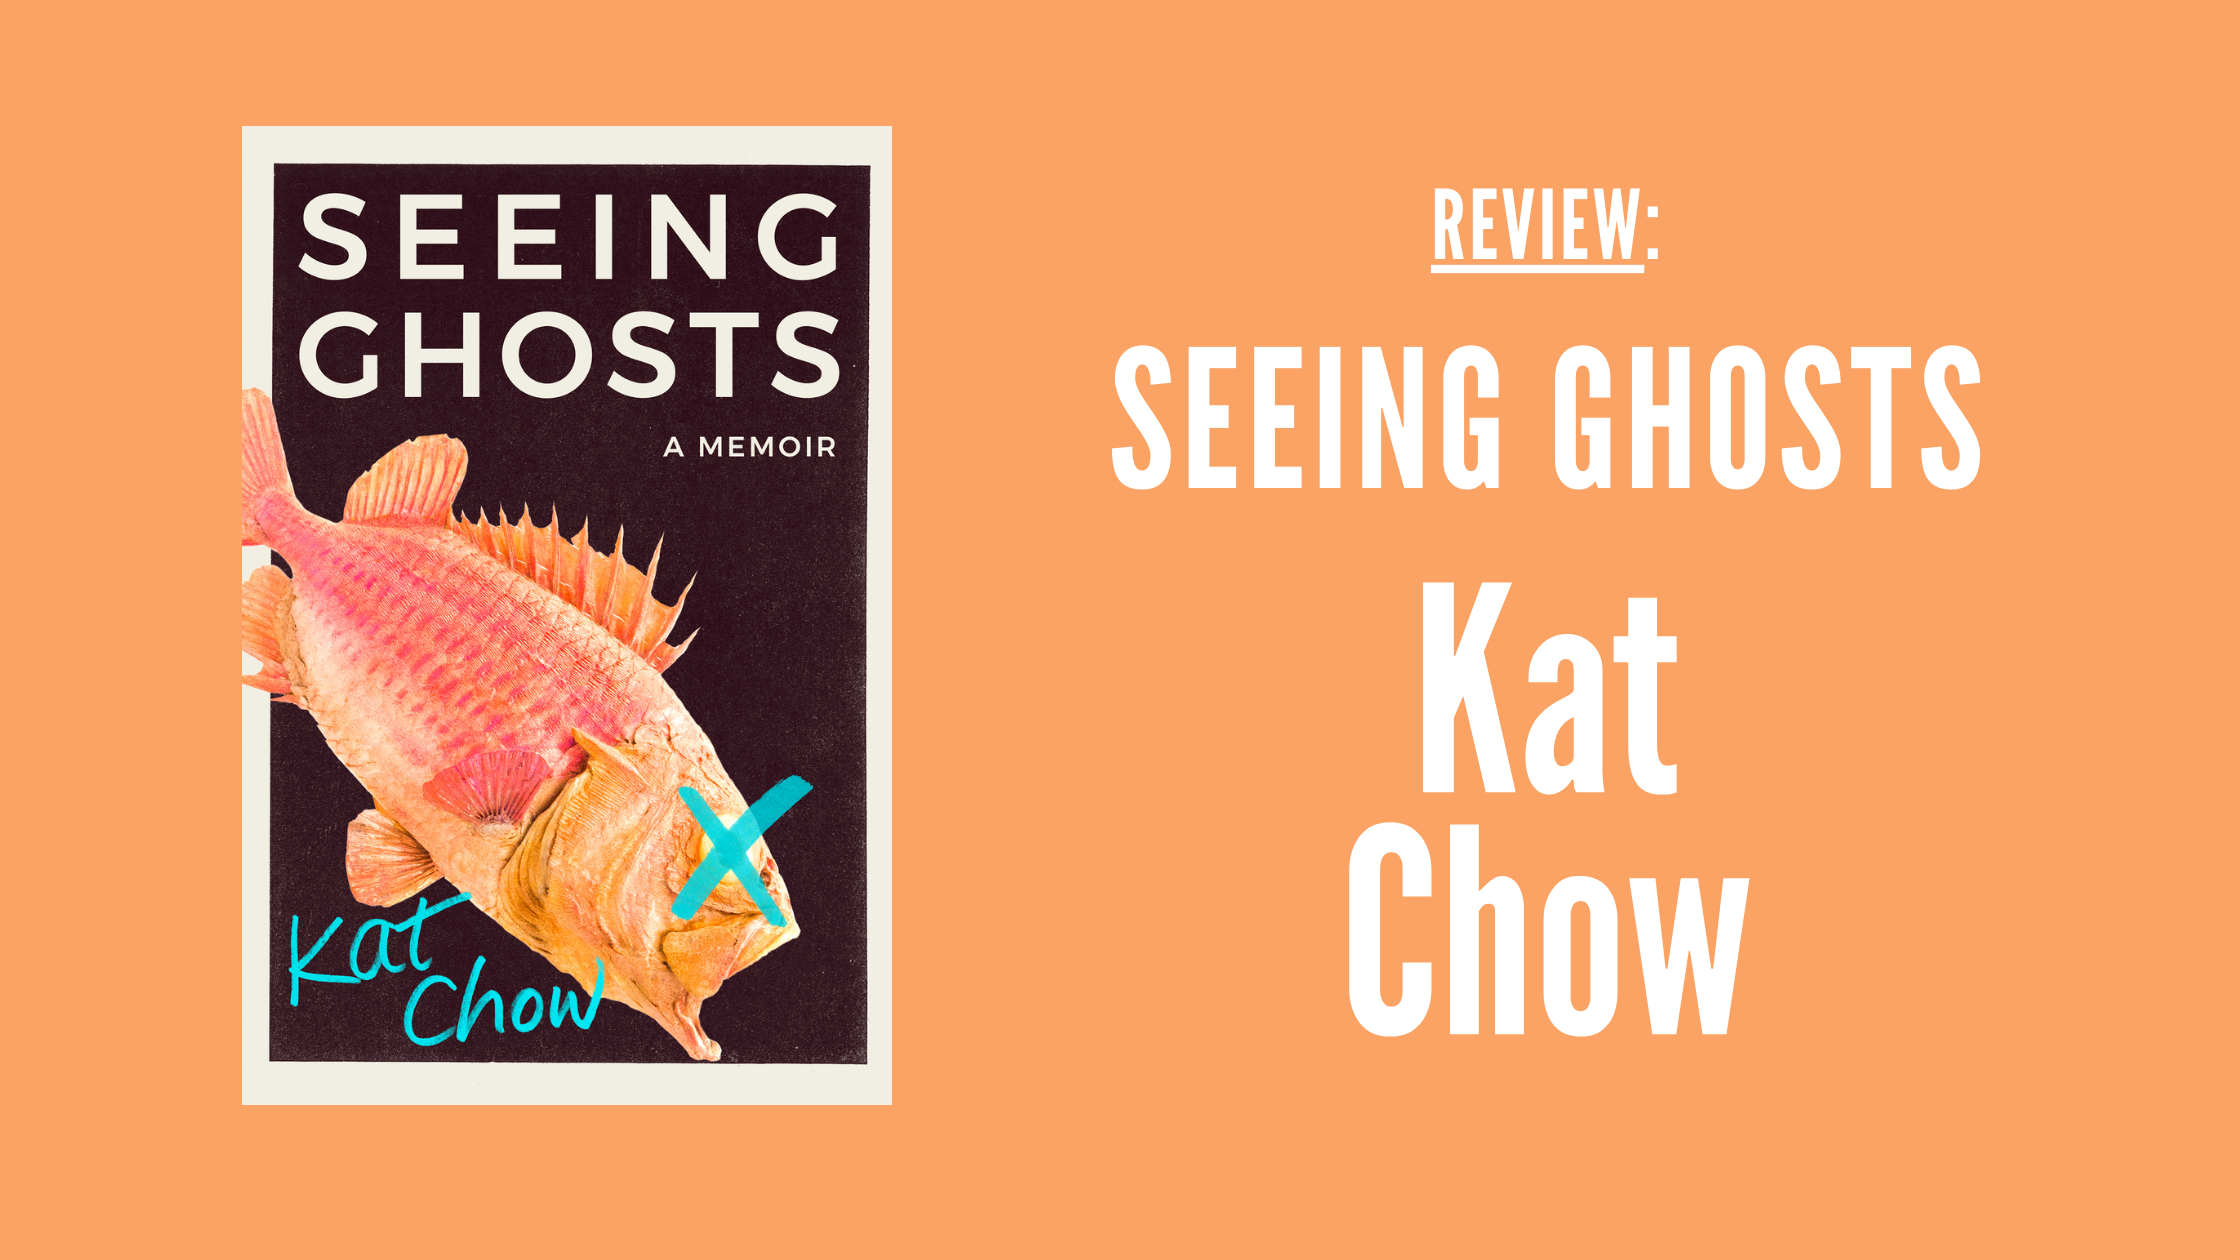 Seeing Ghosts by Kat Chow